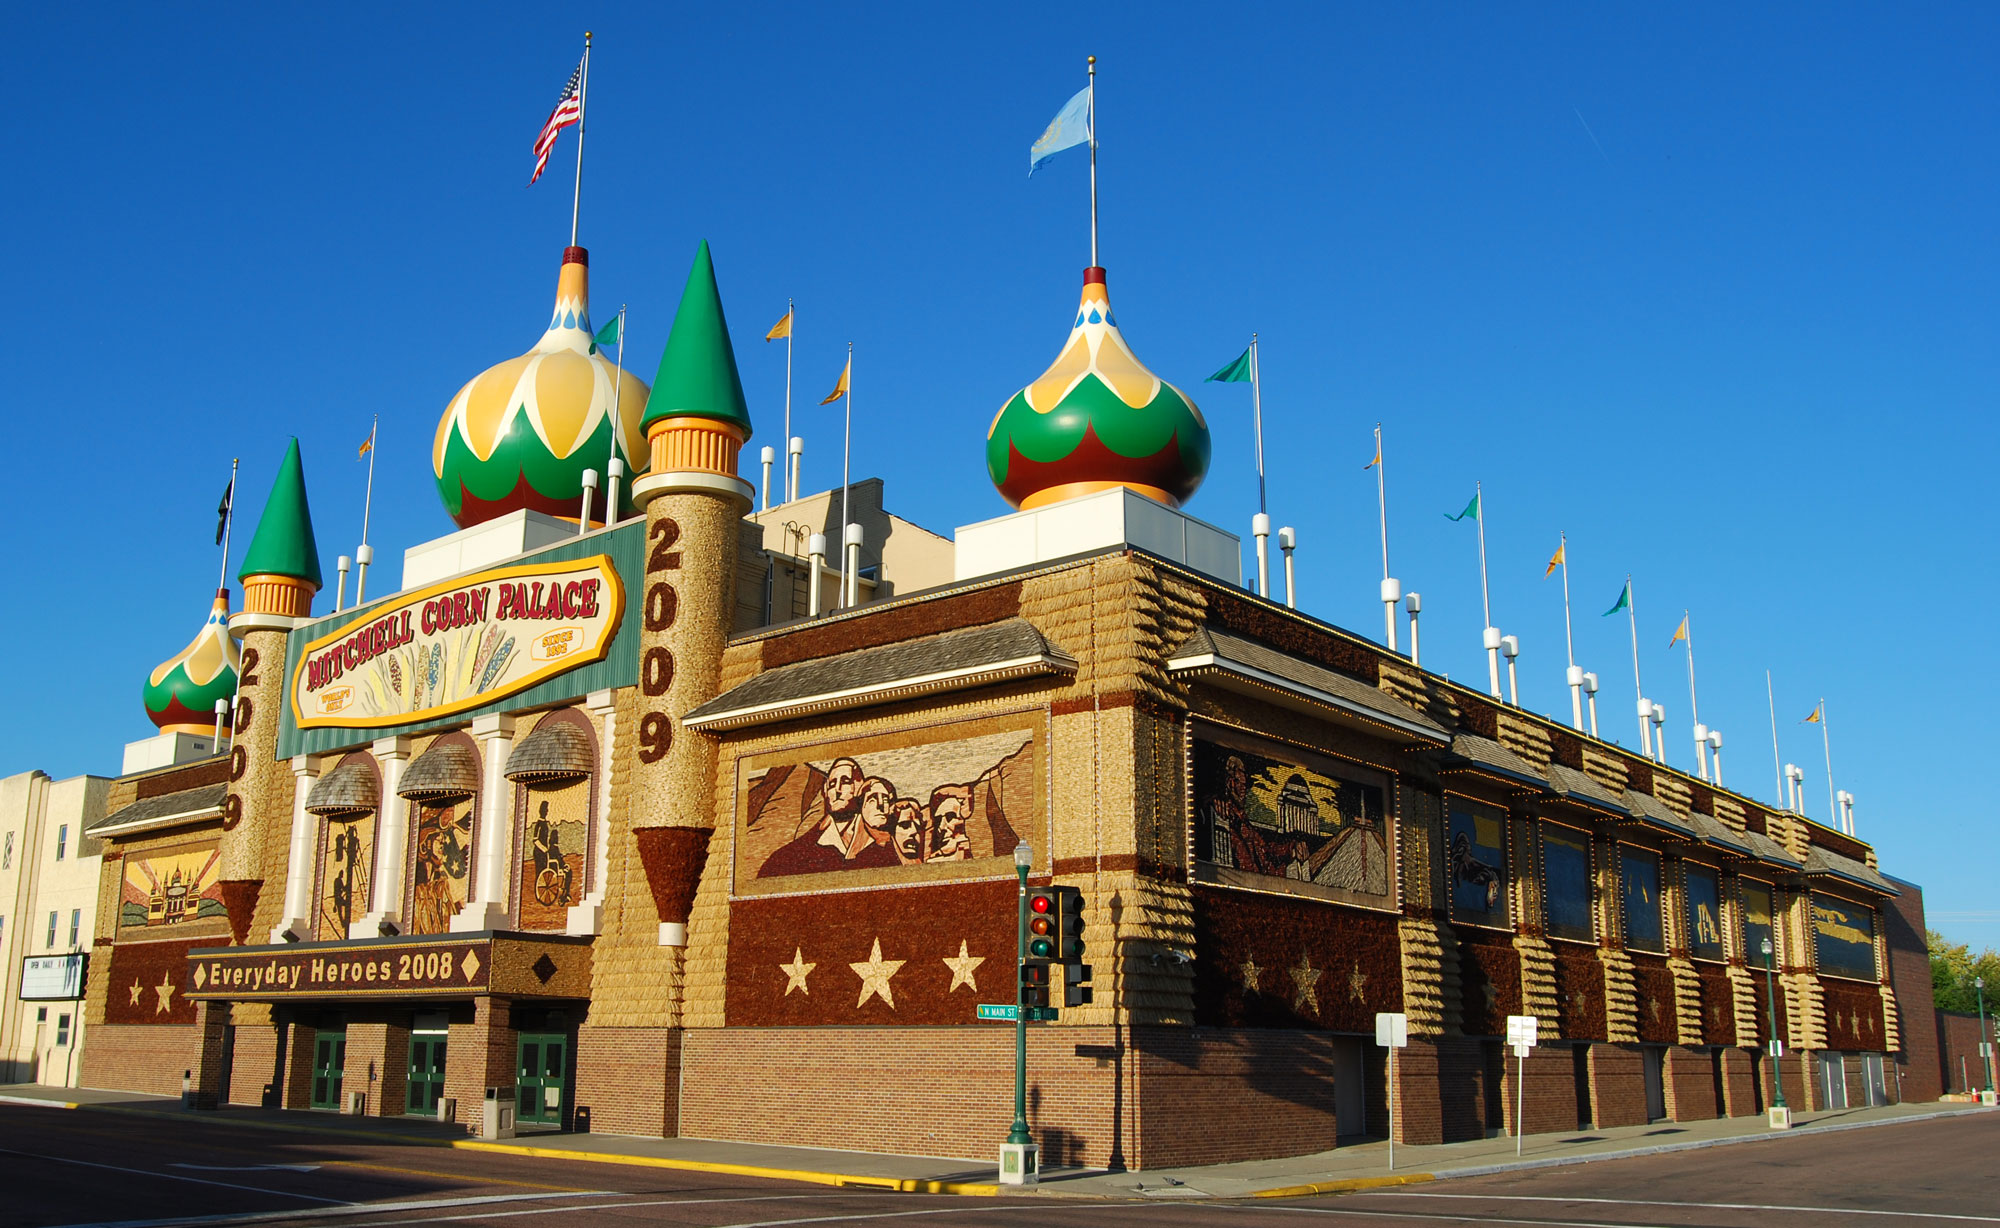 Photograph of the Corn Palace in Mitchell, South Dakota. The photo shows a rectangular building with conical and onion-dome-topped towers. The building is decorated in beige, burgundy, green, and yellow. The two towers with conical peaks flanking the front entrance say "2009." Flags fly from the tops of the three onion-dome-topped towers on the front corners and in the center-front of the building. Murals on the walls of the building depict various scenes, the the nearest mural showing the faces on Mount Rushmore. The theme of the palace is "Everyday Heroes 2008" as indicated on the marquee overhanging the front doors.